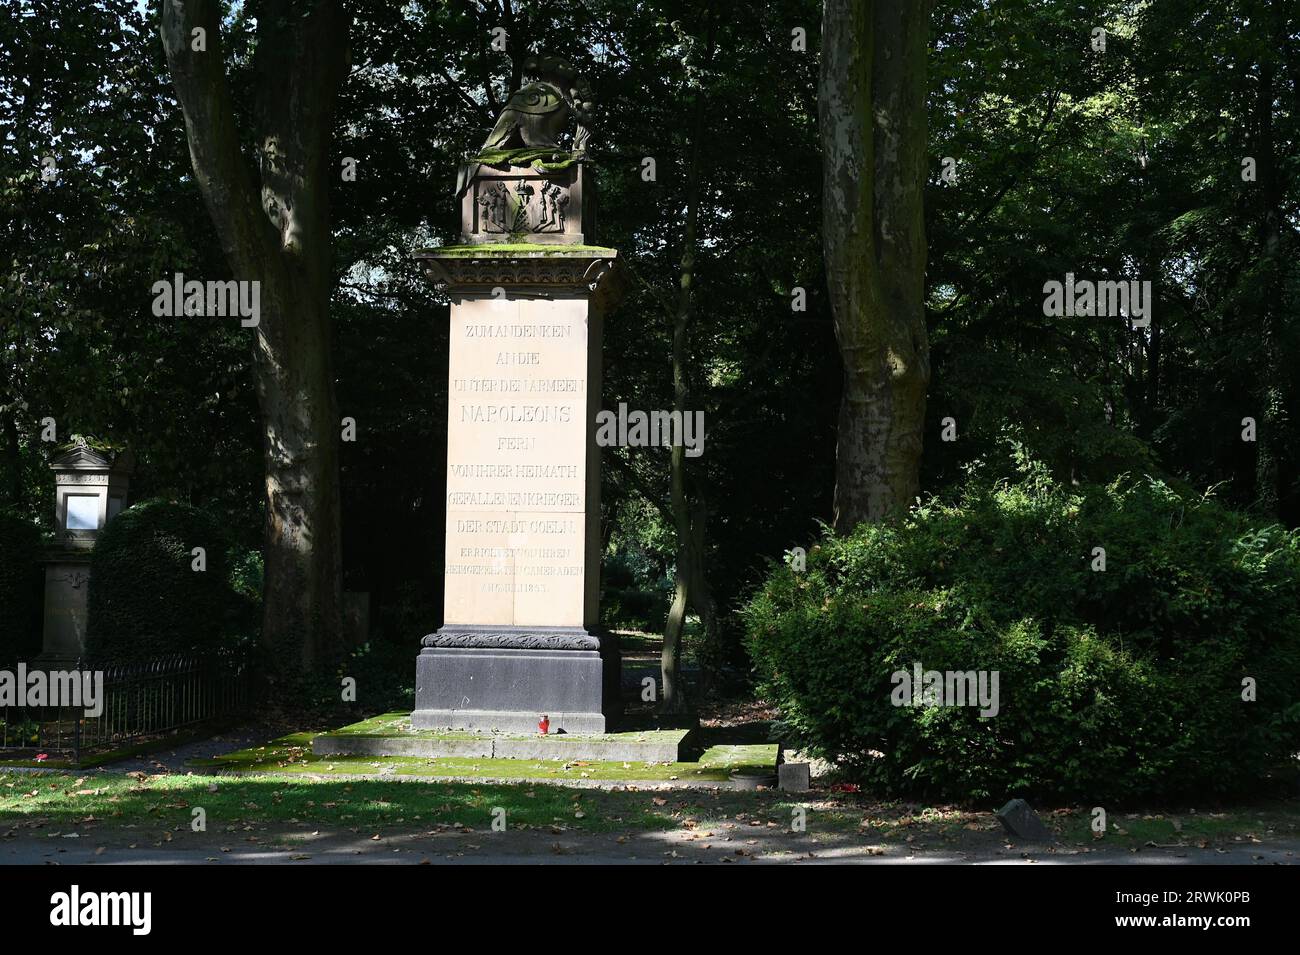 Cologne, Germany. 10th Sep, 2023. The Napoleon Stone in Cologne's Melaten Cemetery is a war memorial to soldiers from Cologne who fought under Napoleon Bonaparte and died during the Napoleonic Wars. Grave at the Cologne Cemetery of Celebrities Melaten Credit: Horst Galuschka/dpa/Horst Galuschka dpa/Alamy Live News Stock Photo